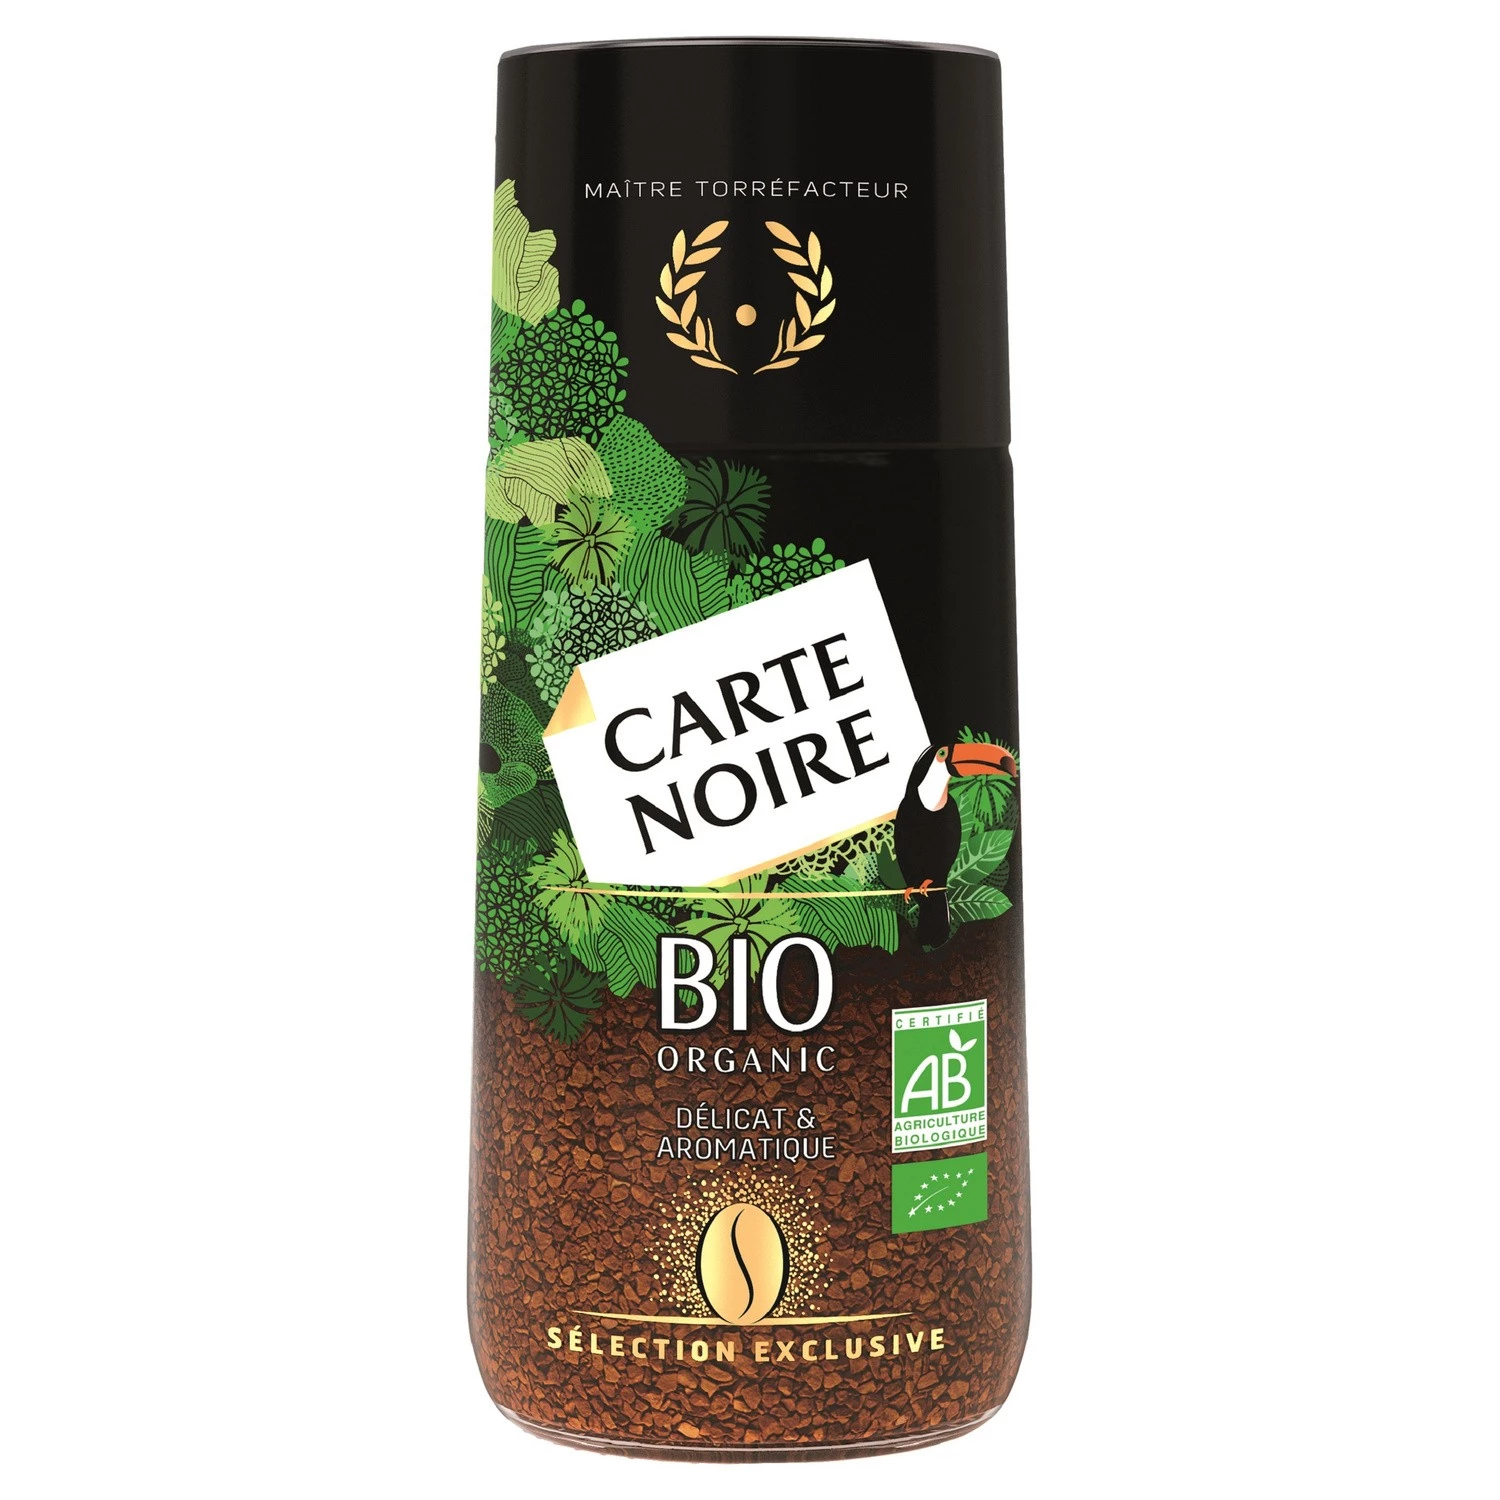 Soluble coffee exclusive selection Organic 95g - CARTE NOIRE